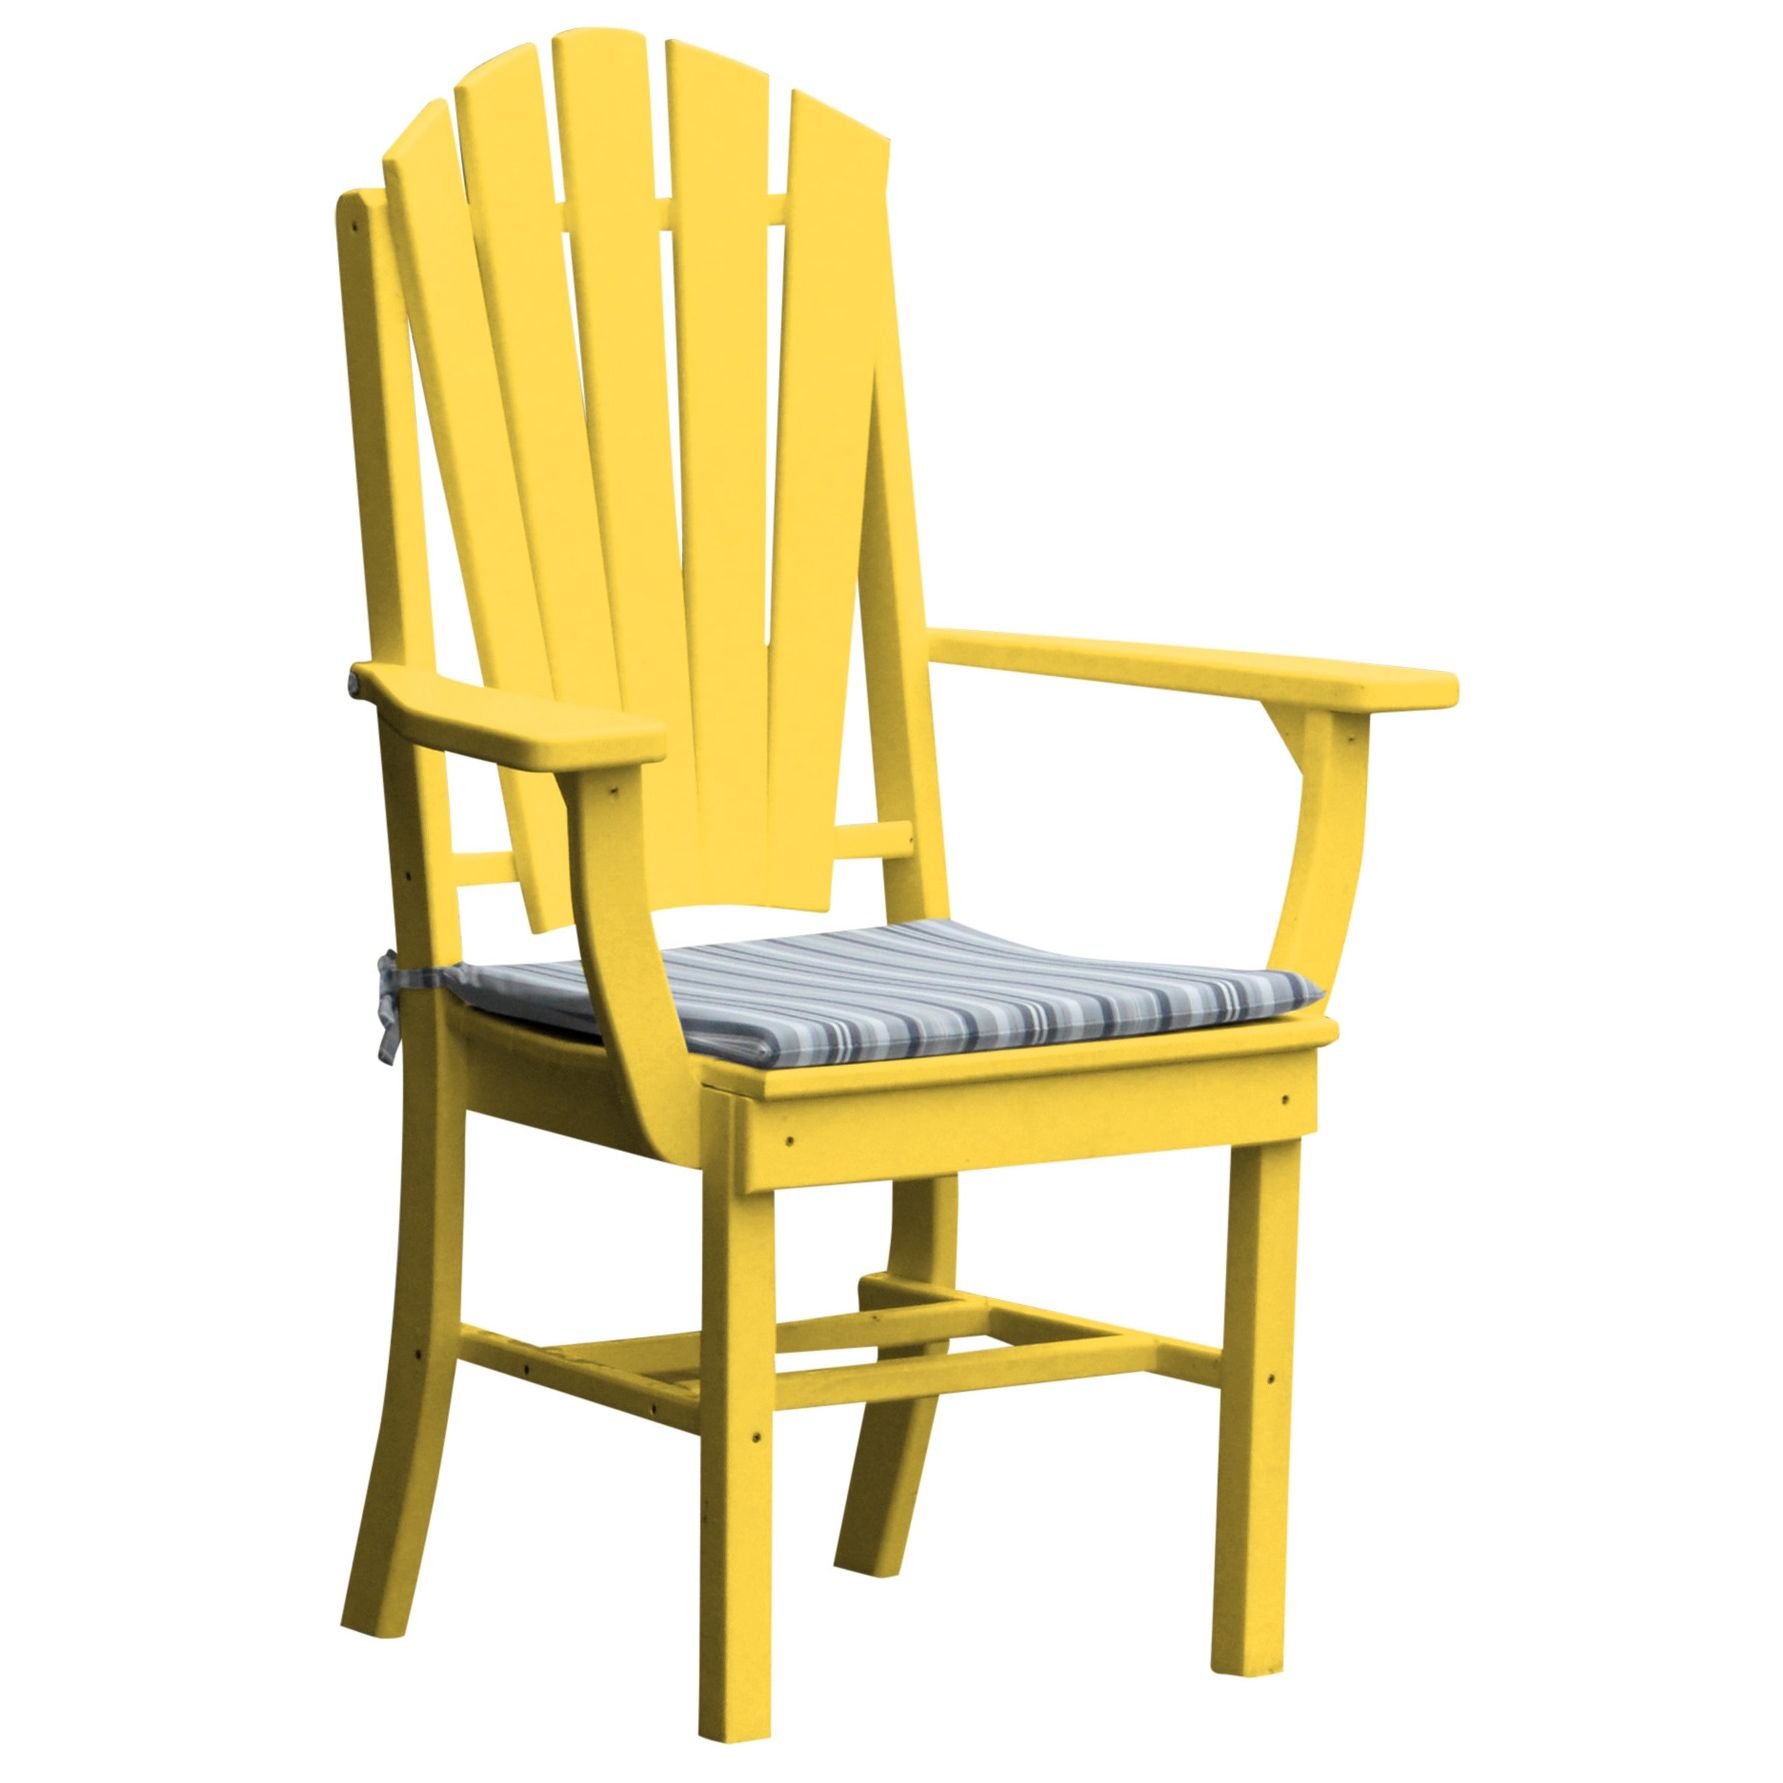 Poly Lumber Adirondack Dining Chair With Arms